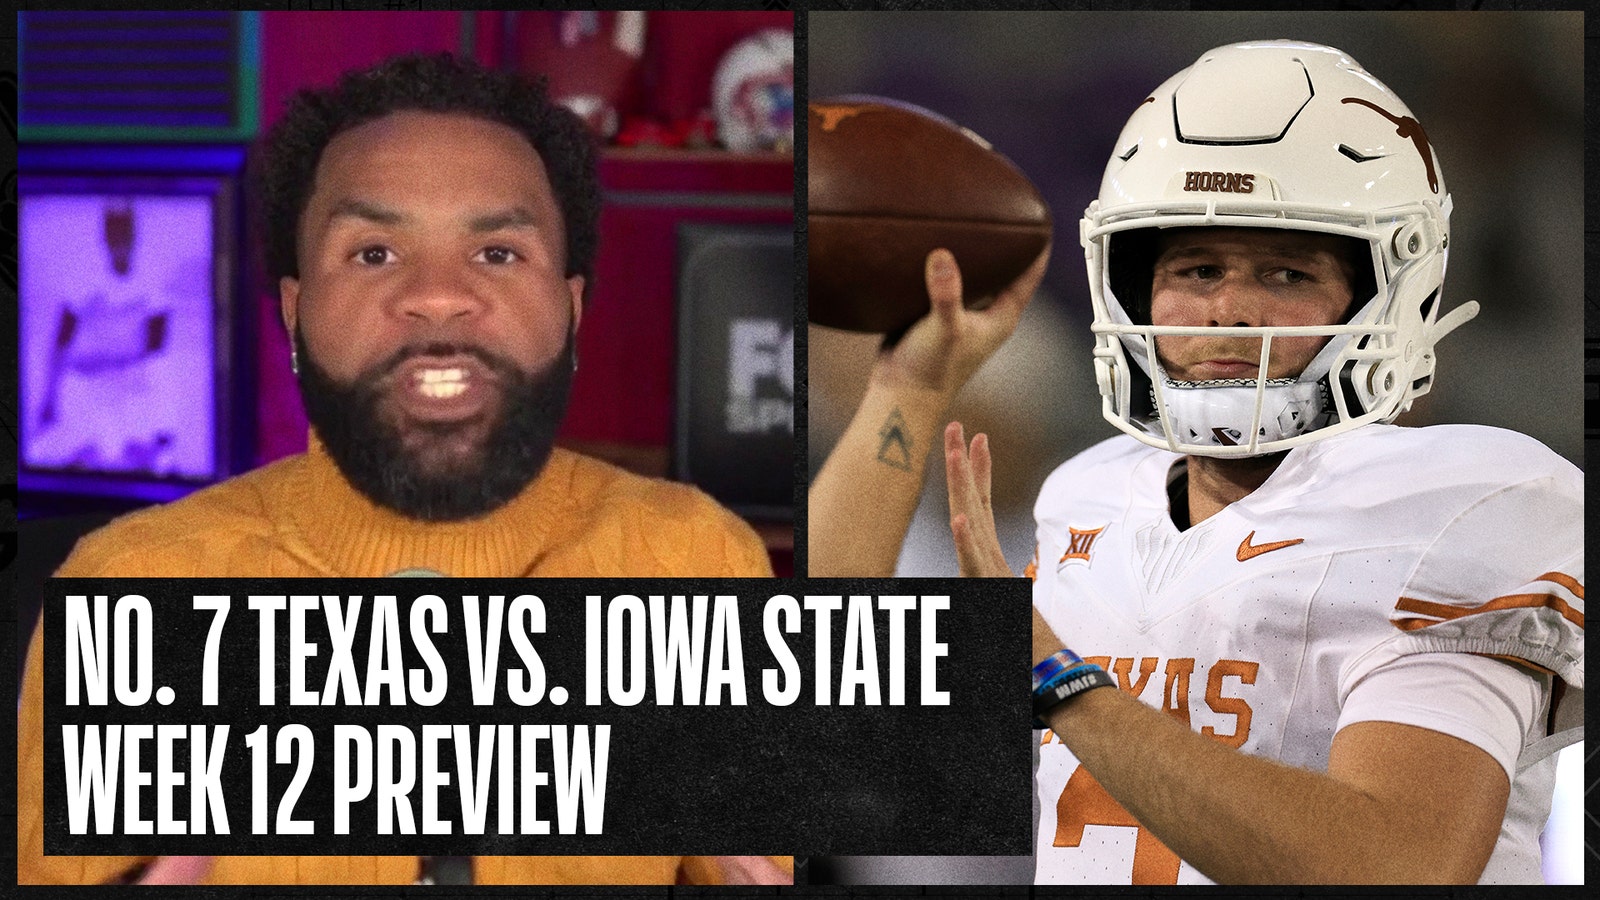 Iowa State could be a problem for No. 7 Texas